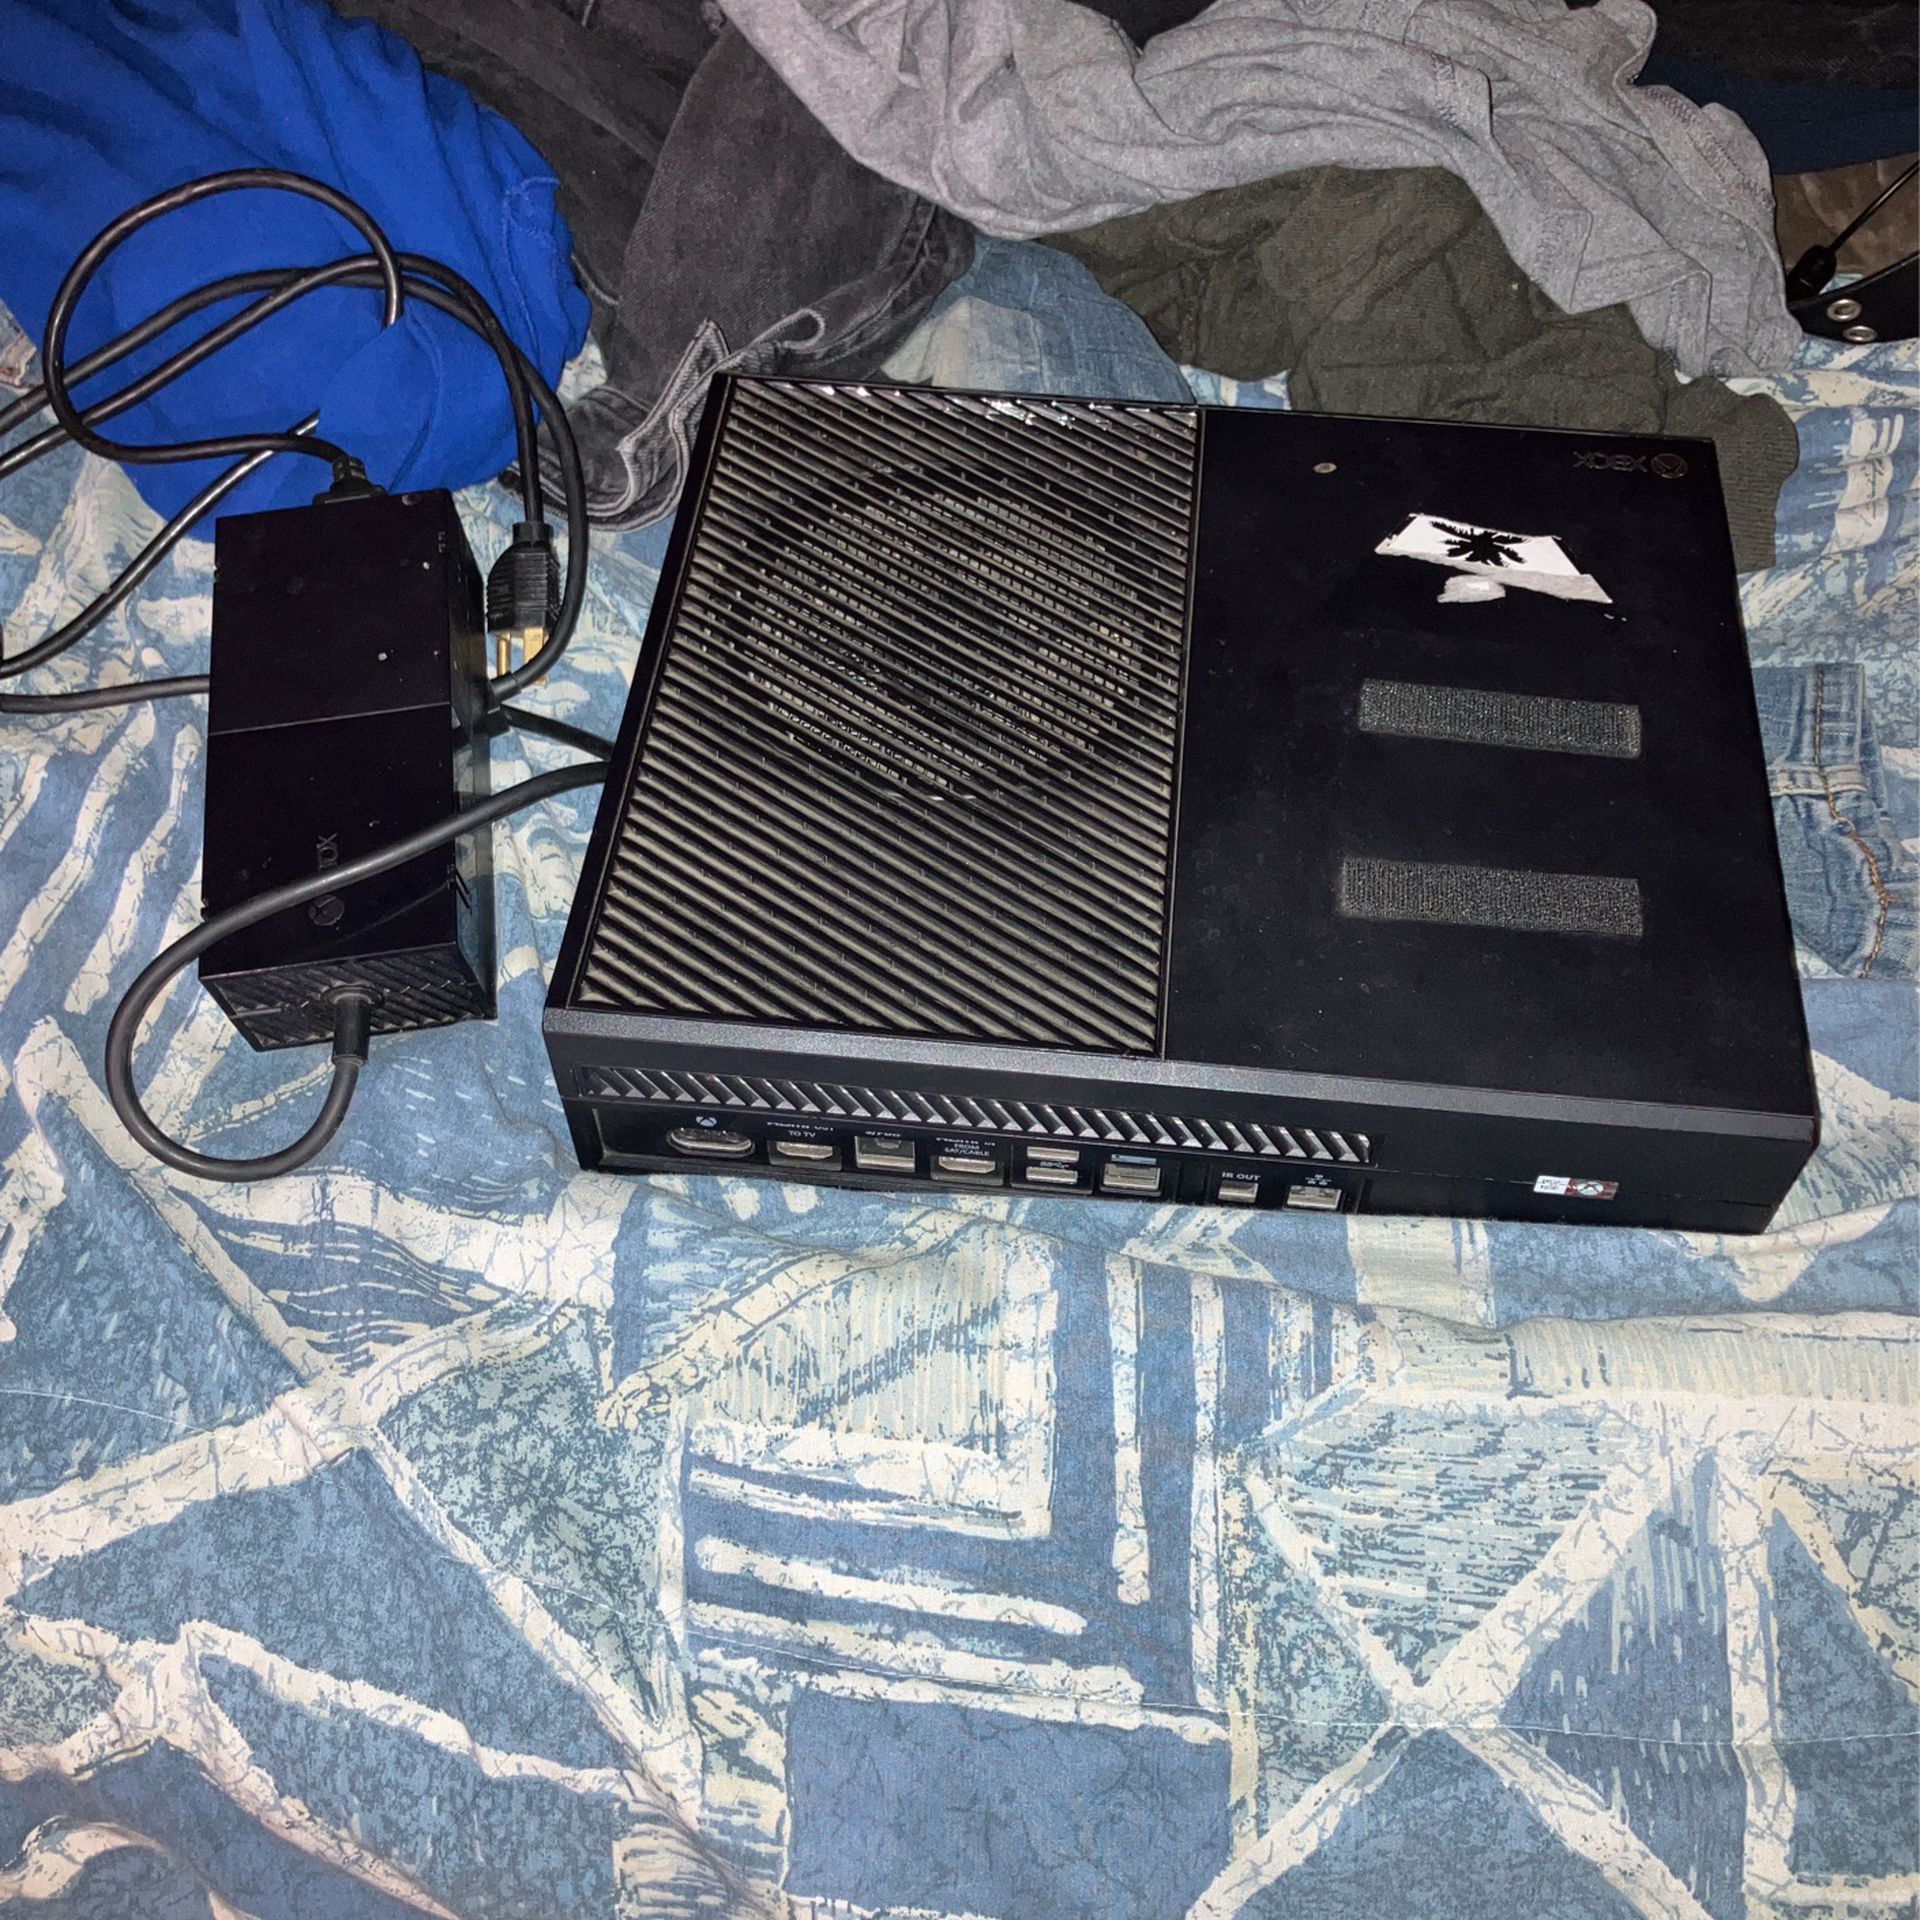 Original Xbox One, Black,parts Only 